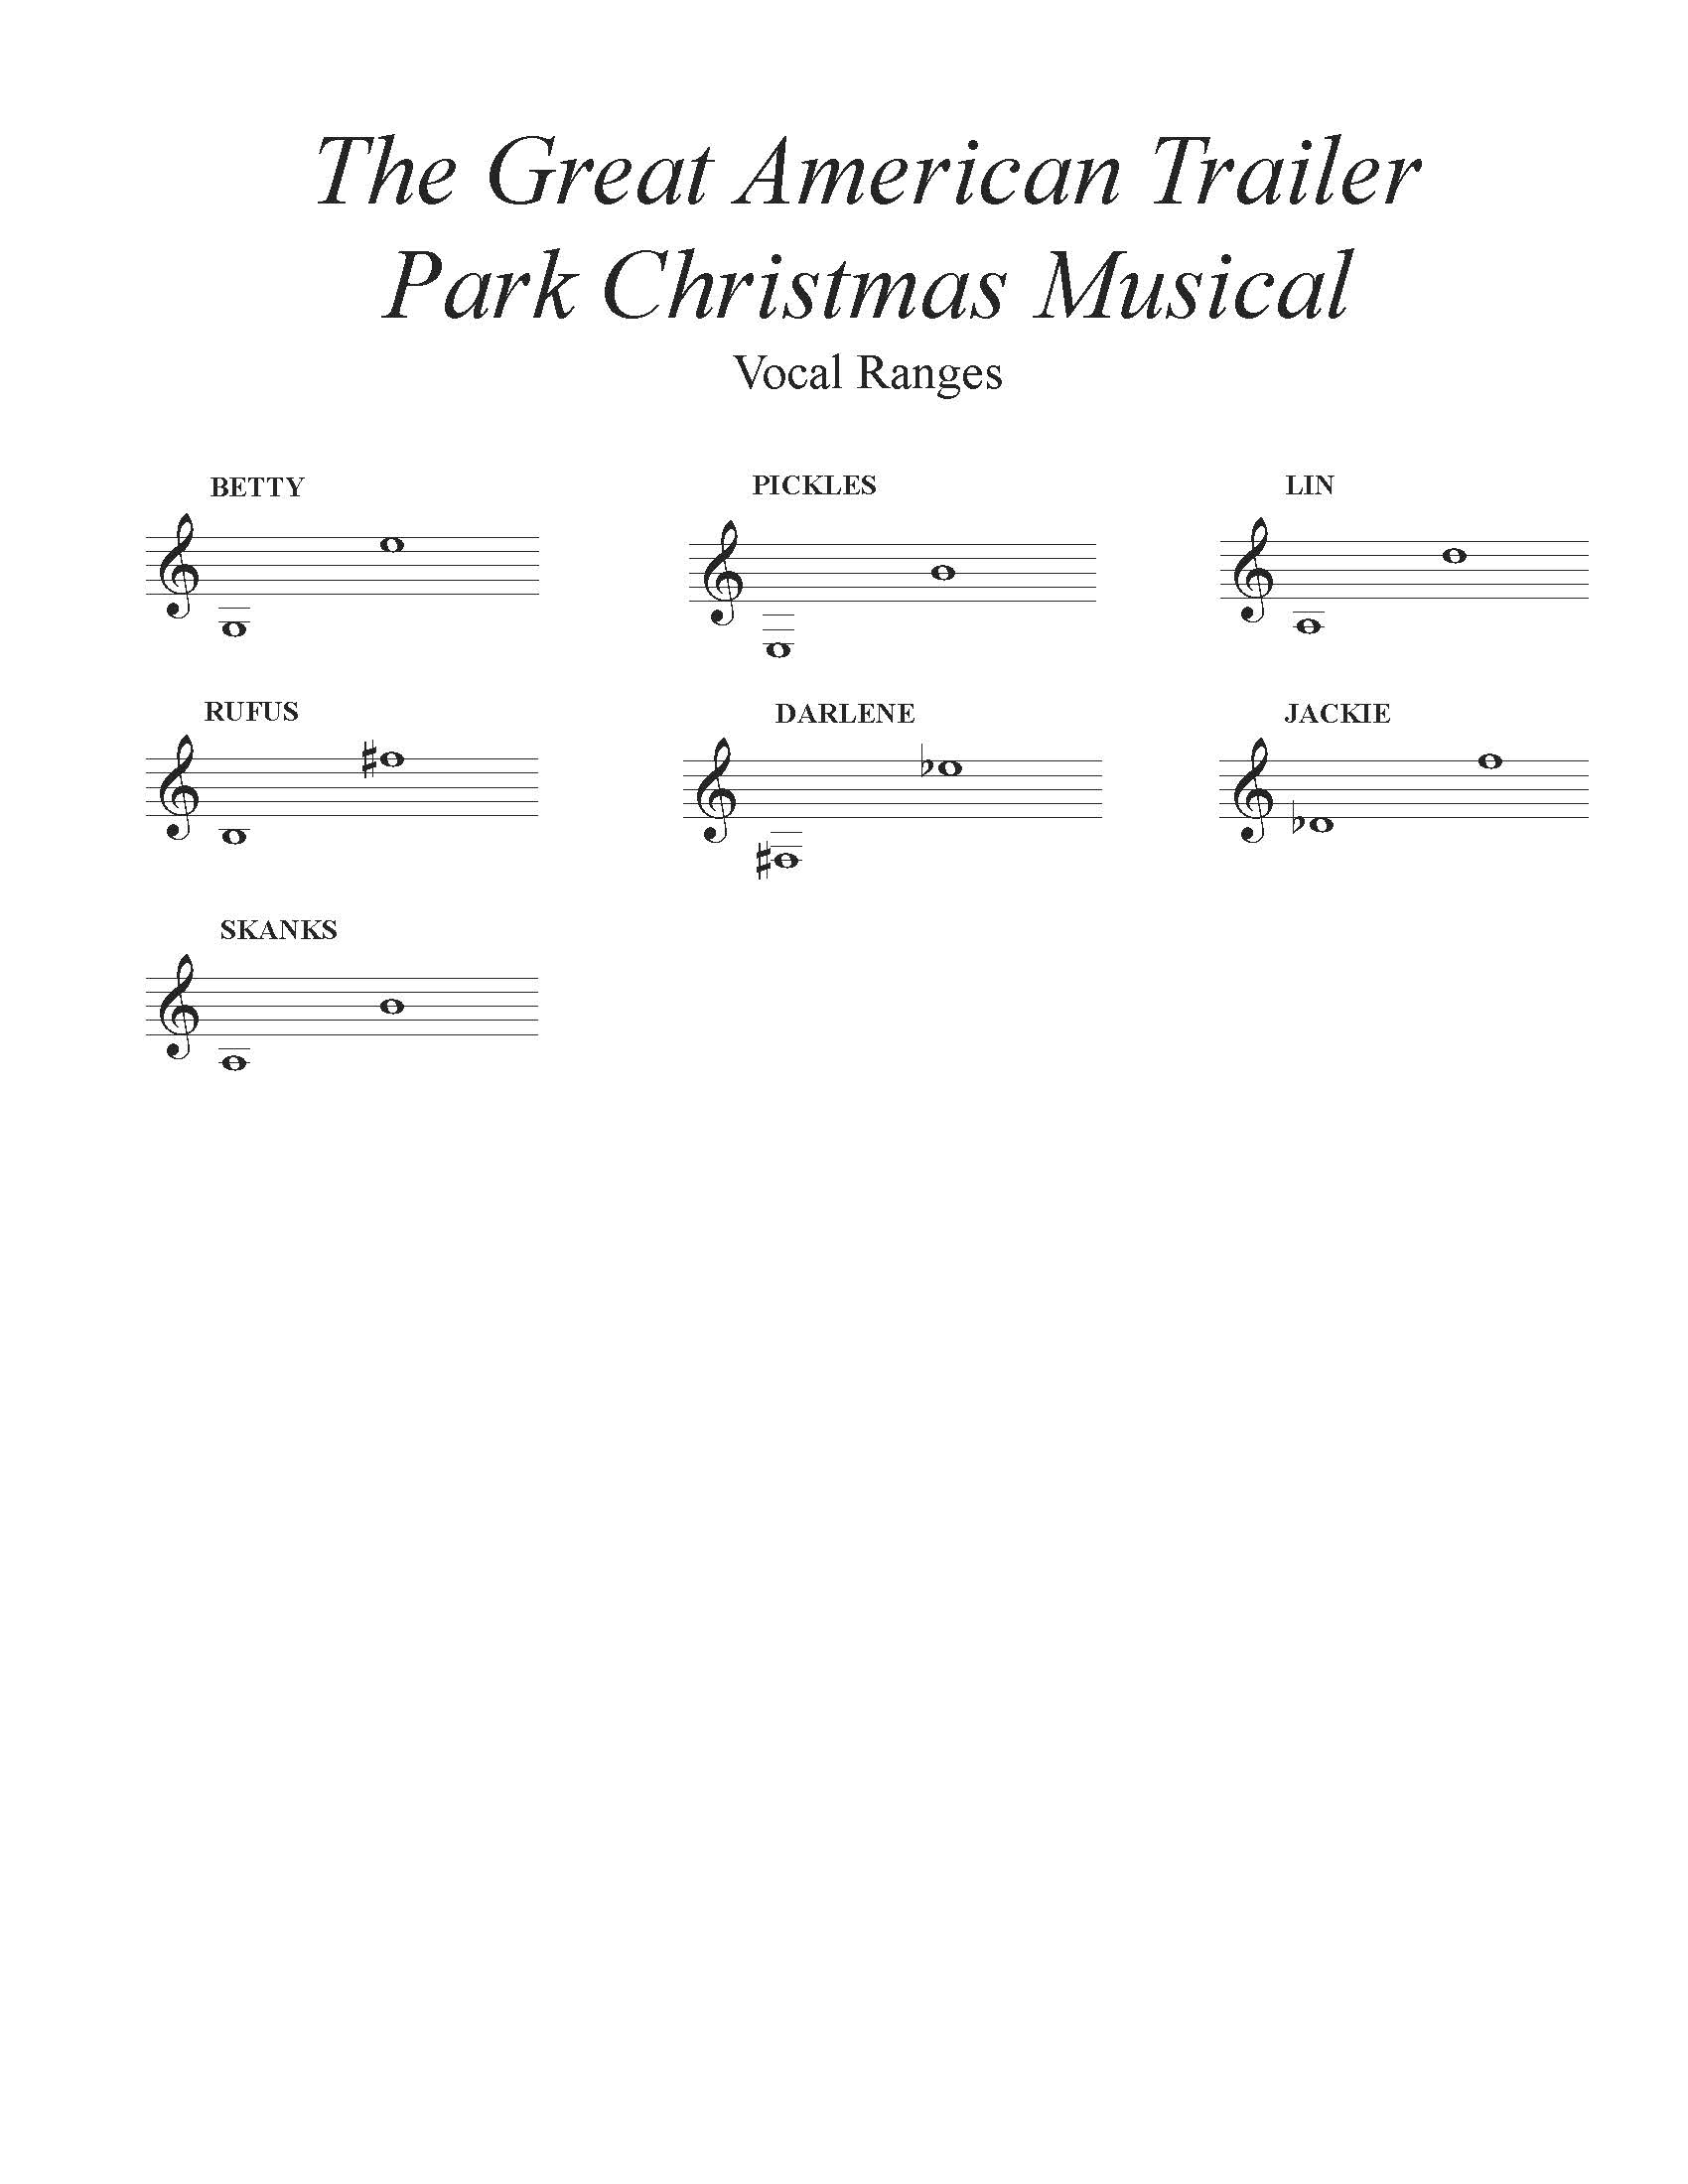 The Great American Trailer Park Christmas Musical Vocal Ranges